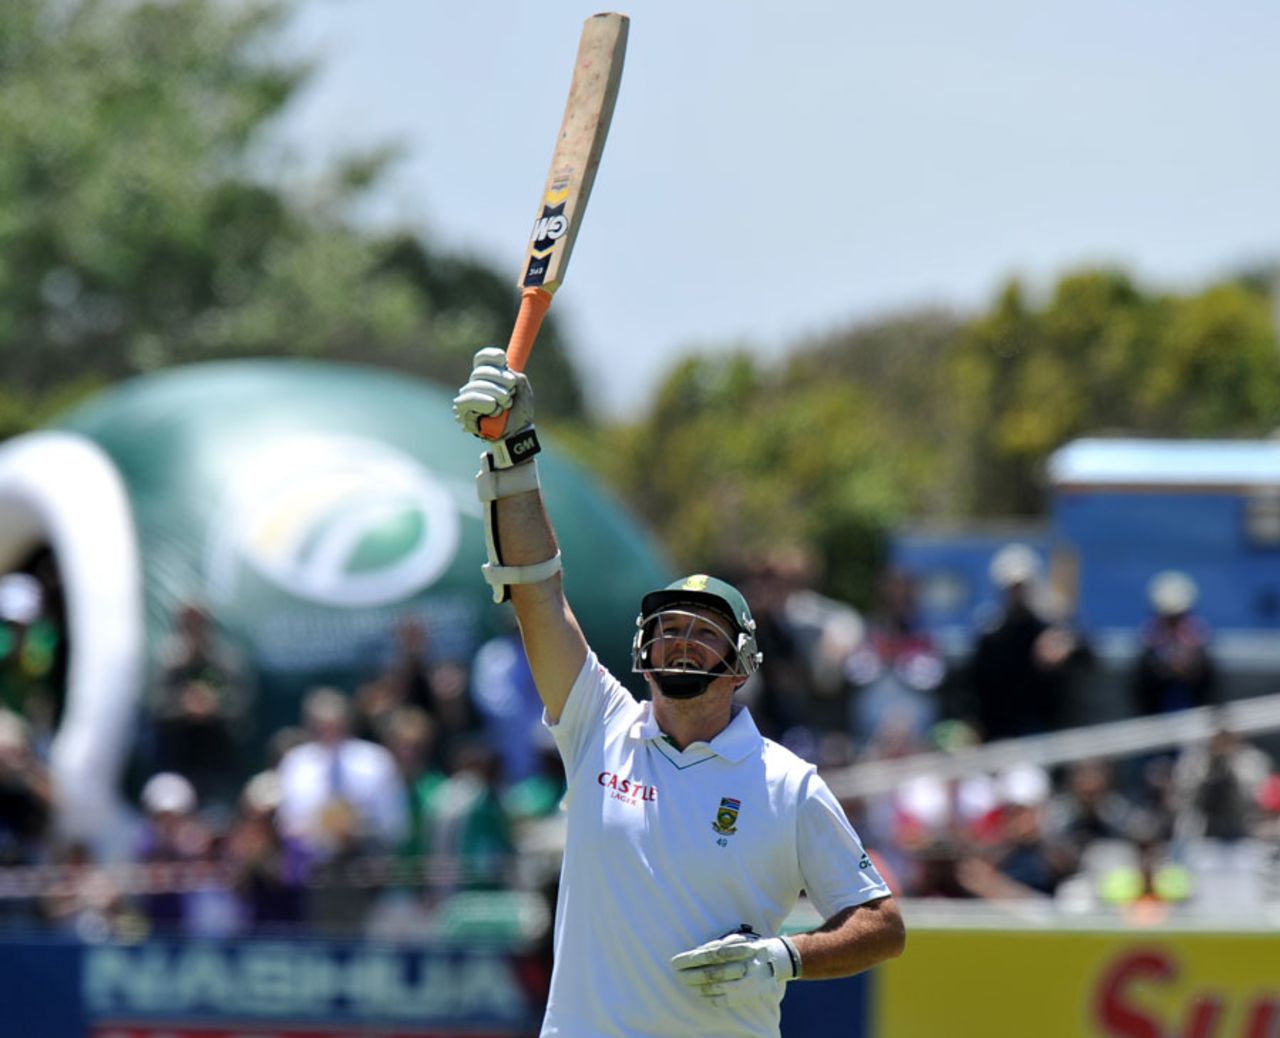 Graeme Smith raises his bat after reaching his hundred, South Africa v Australia, 1st Test, Cape Town, 3rd day, November 11, 2011